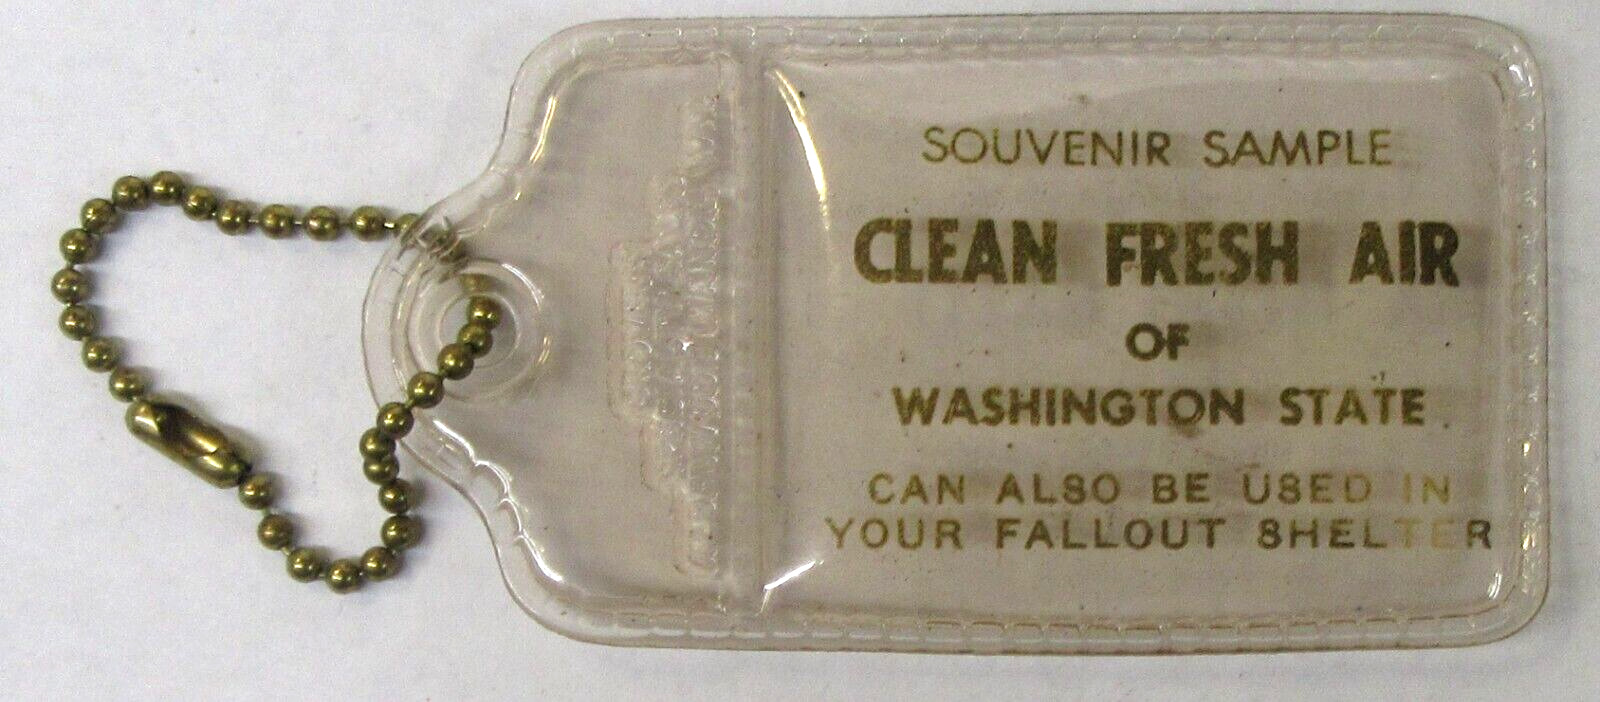 Sample CLEAN FRESH AIR OF WASHINGTON STATE for Fallout Shelter keyring keychain